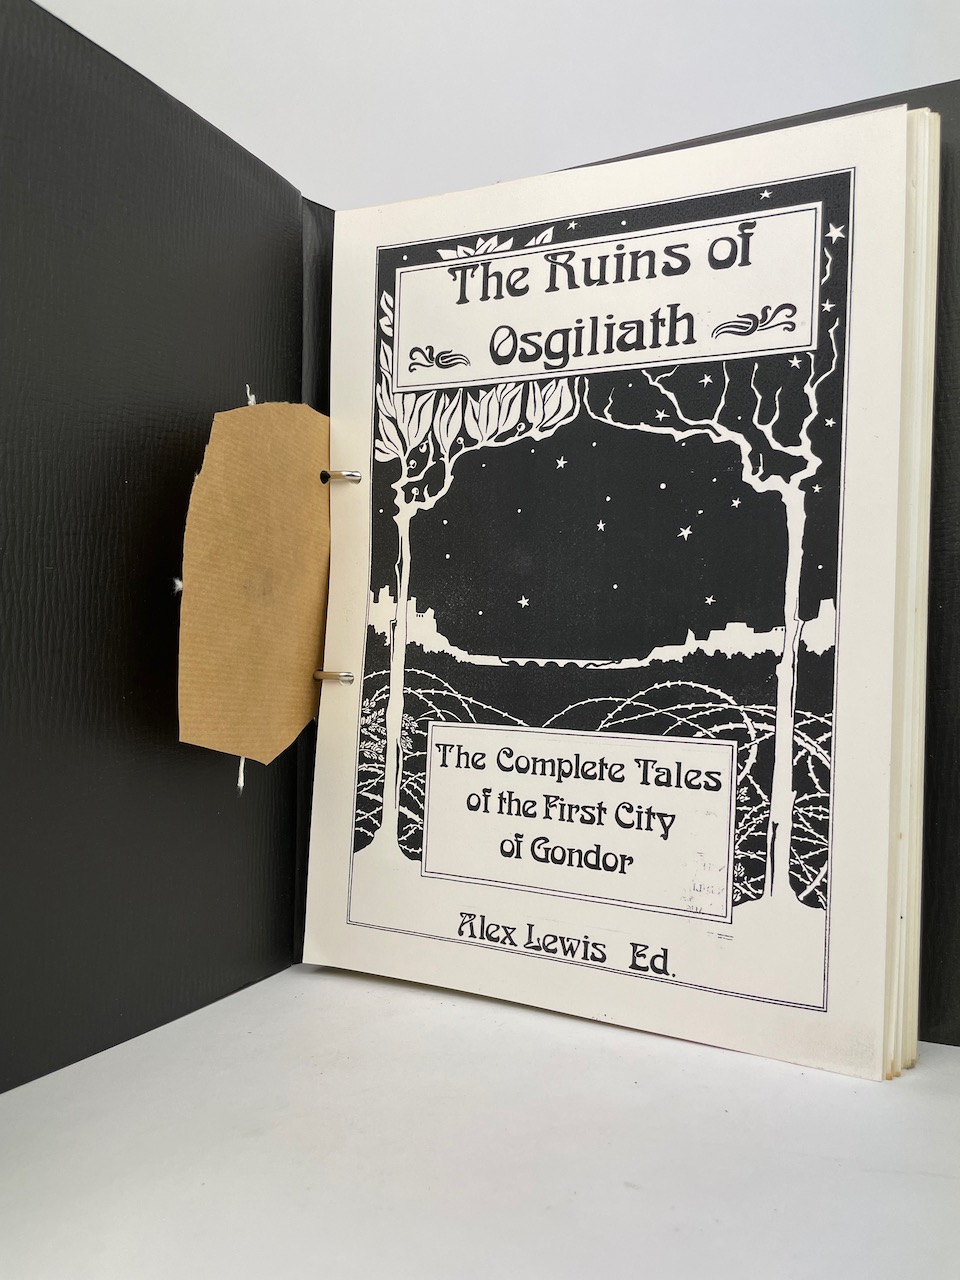 The Complete Ruins of Osgiliath, Signed Limited Numbered Edition, nr 9 of 12 5